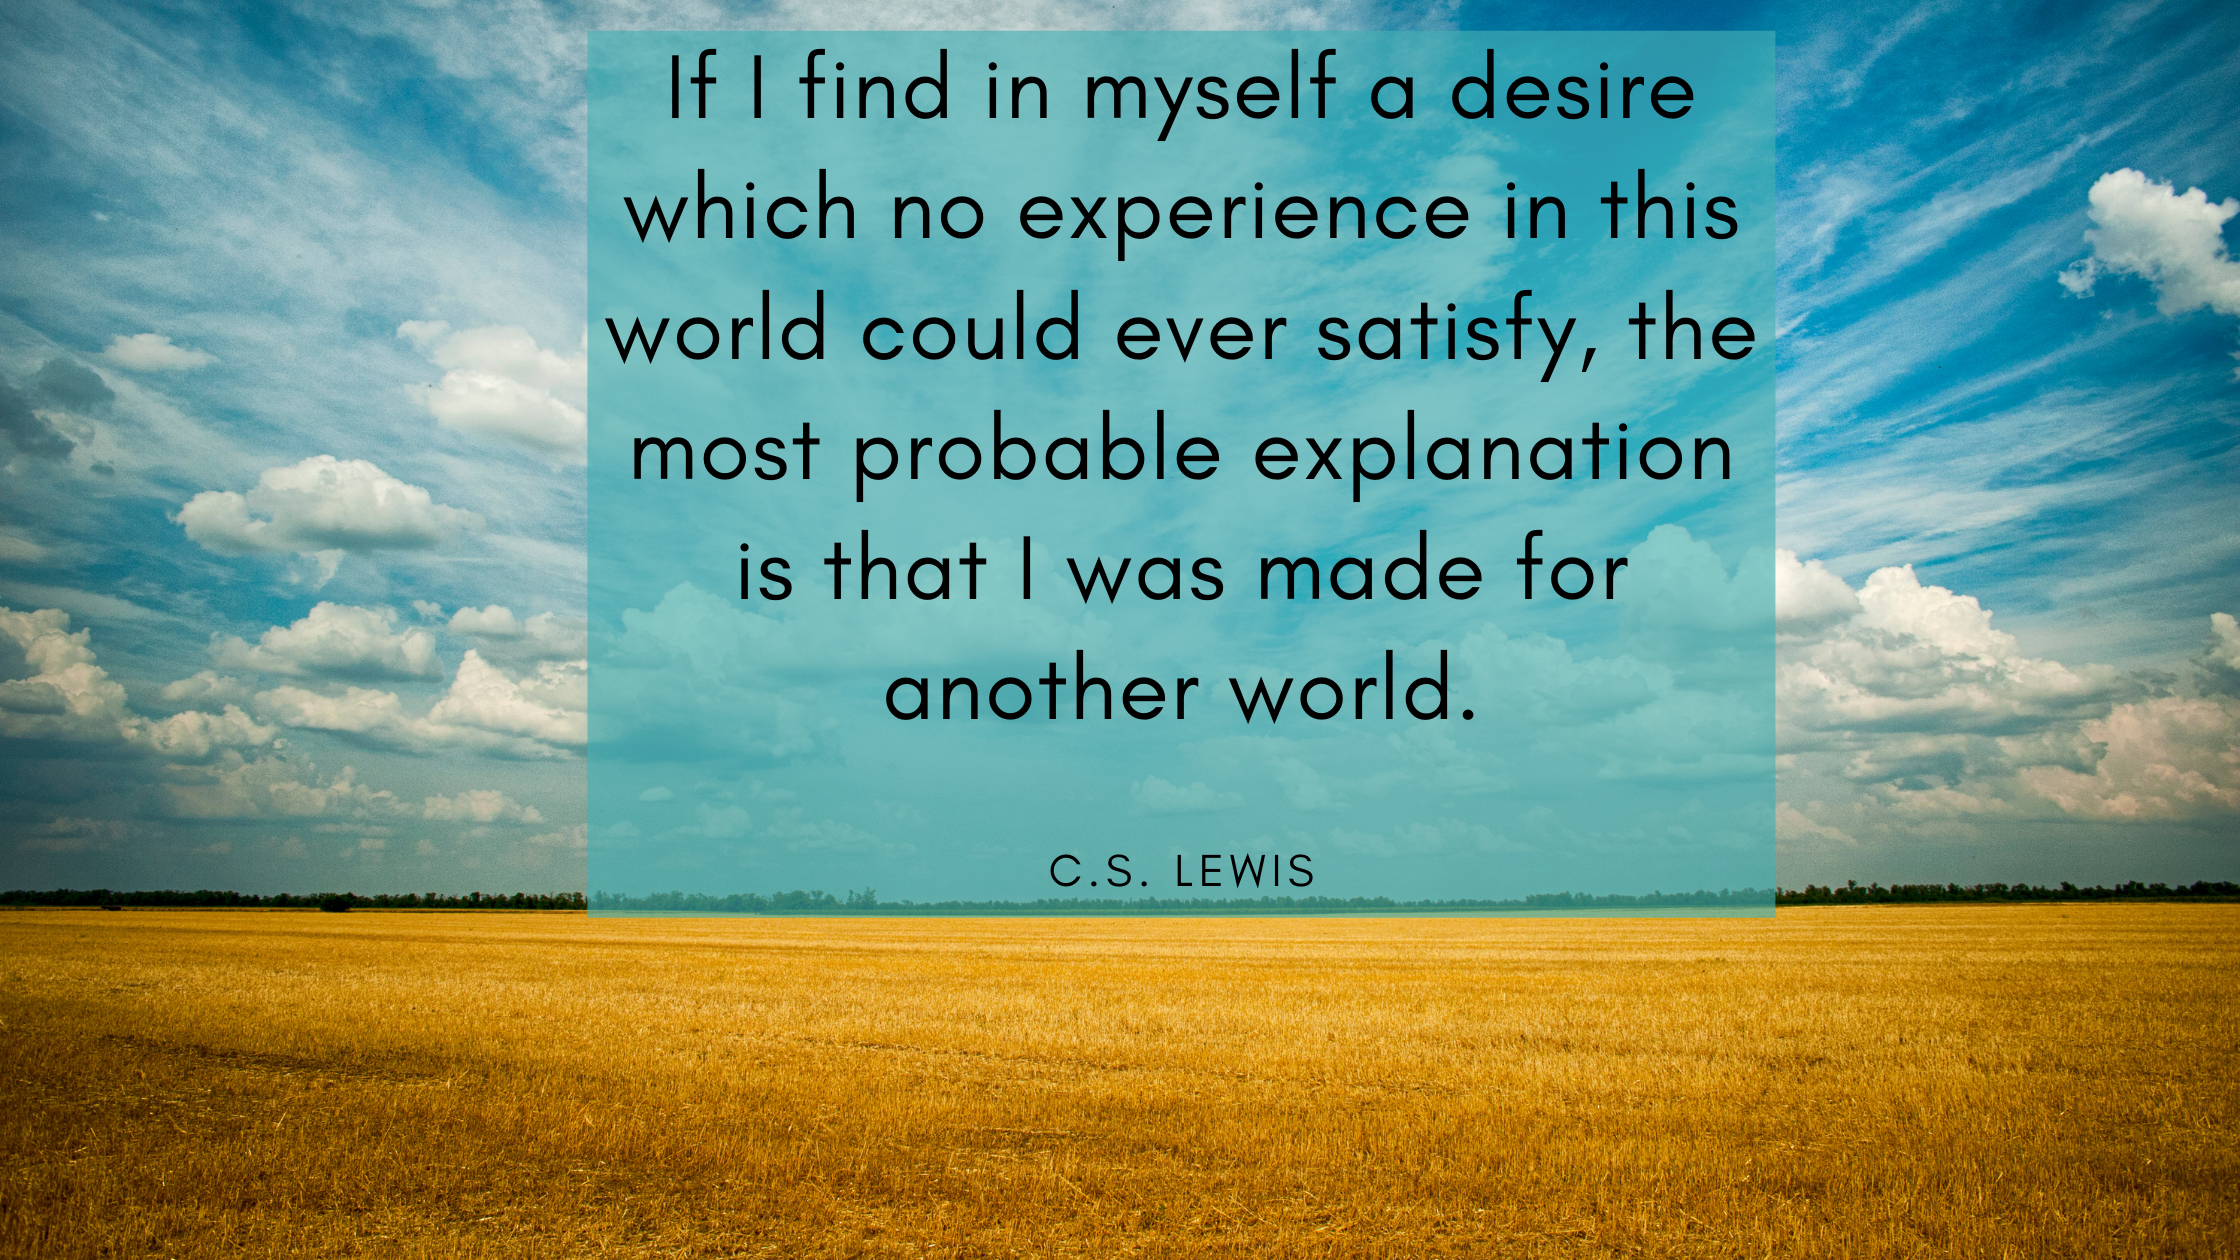 “If I find in myself a desire which no experience in this world could ever satisfy, the most probable explanation is that I was made for another world